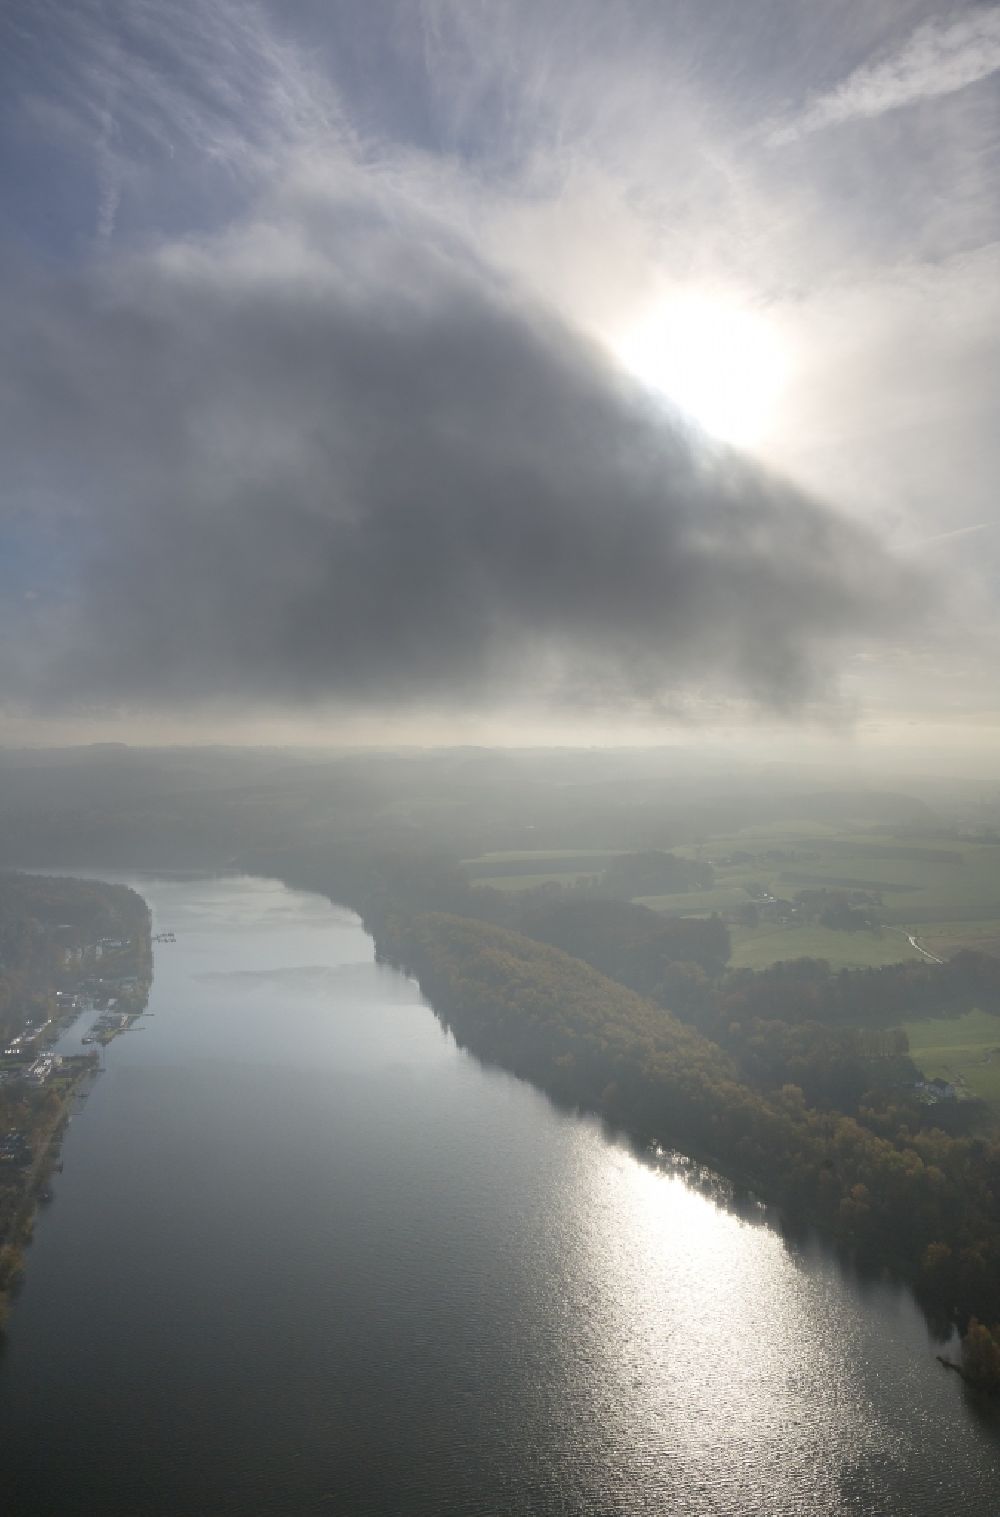 Aerial image Essen - A thick layer of autumn weather clouds covers the lake Baldeneysee between the Essen districts Kupferdreh and the Ruhr peninsular Heisingen in the state North Rhine-Westphalia